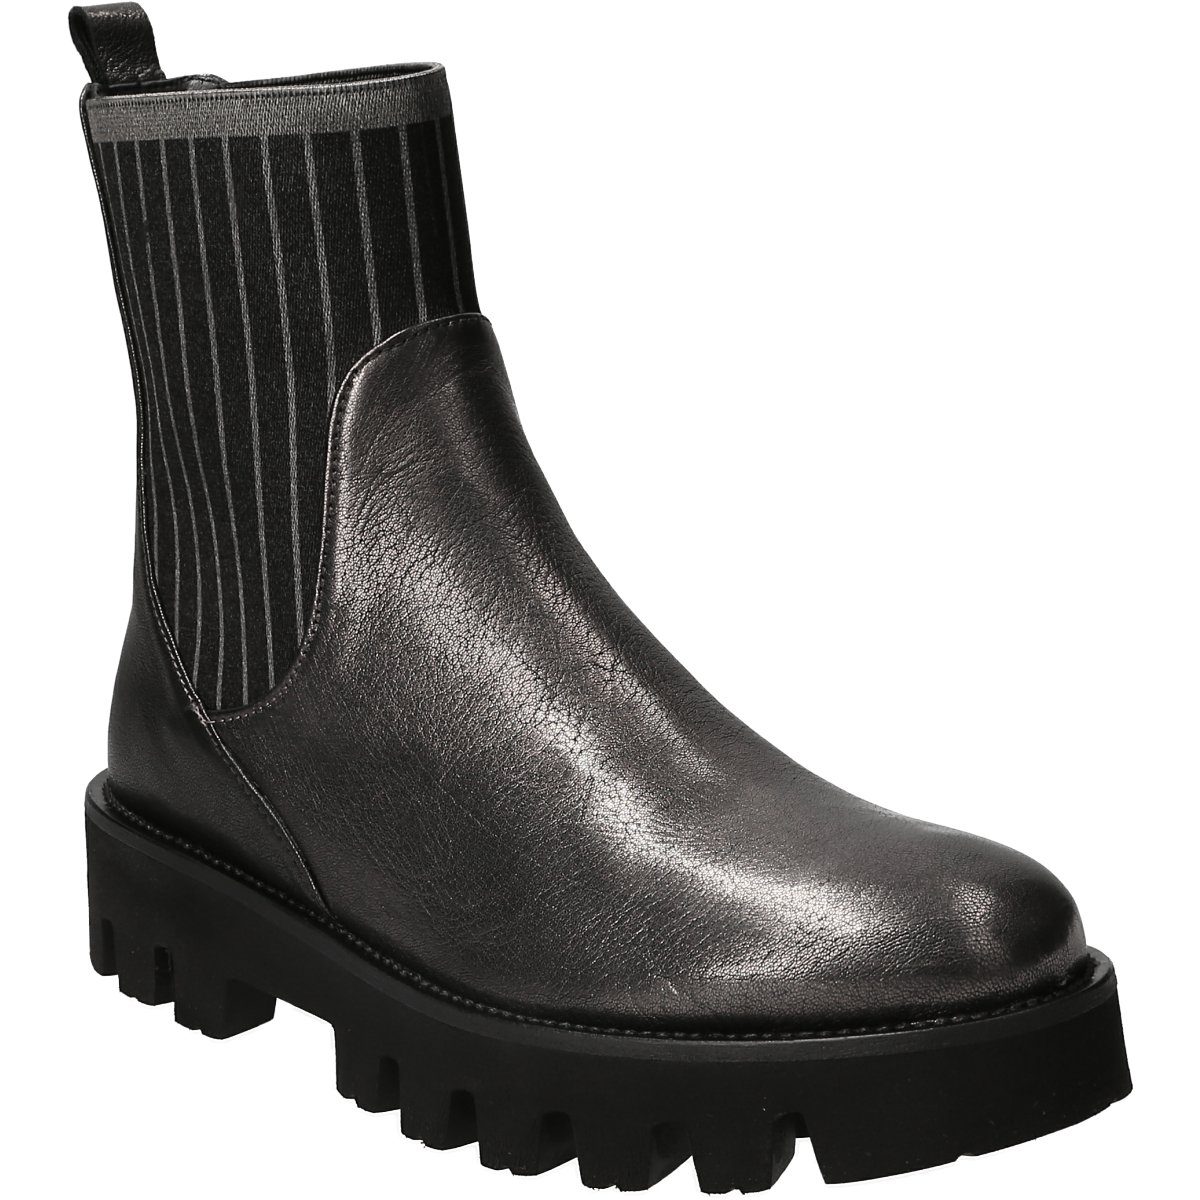 Homers 19359 Stiefel